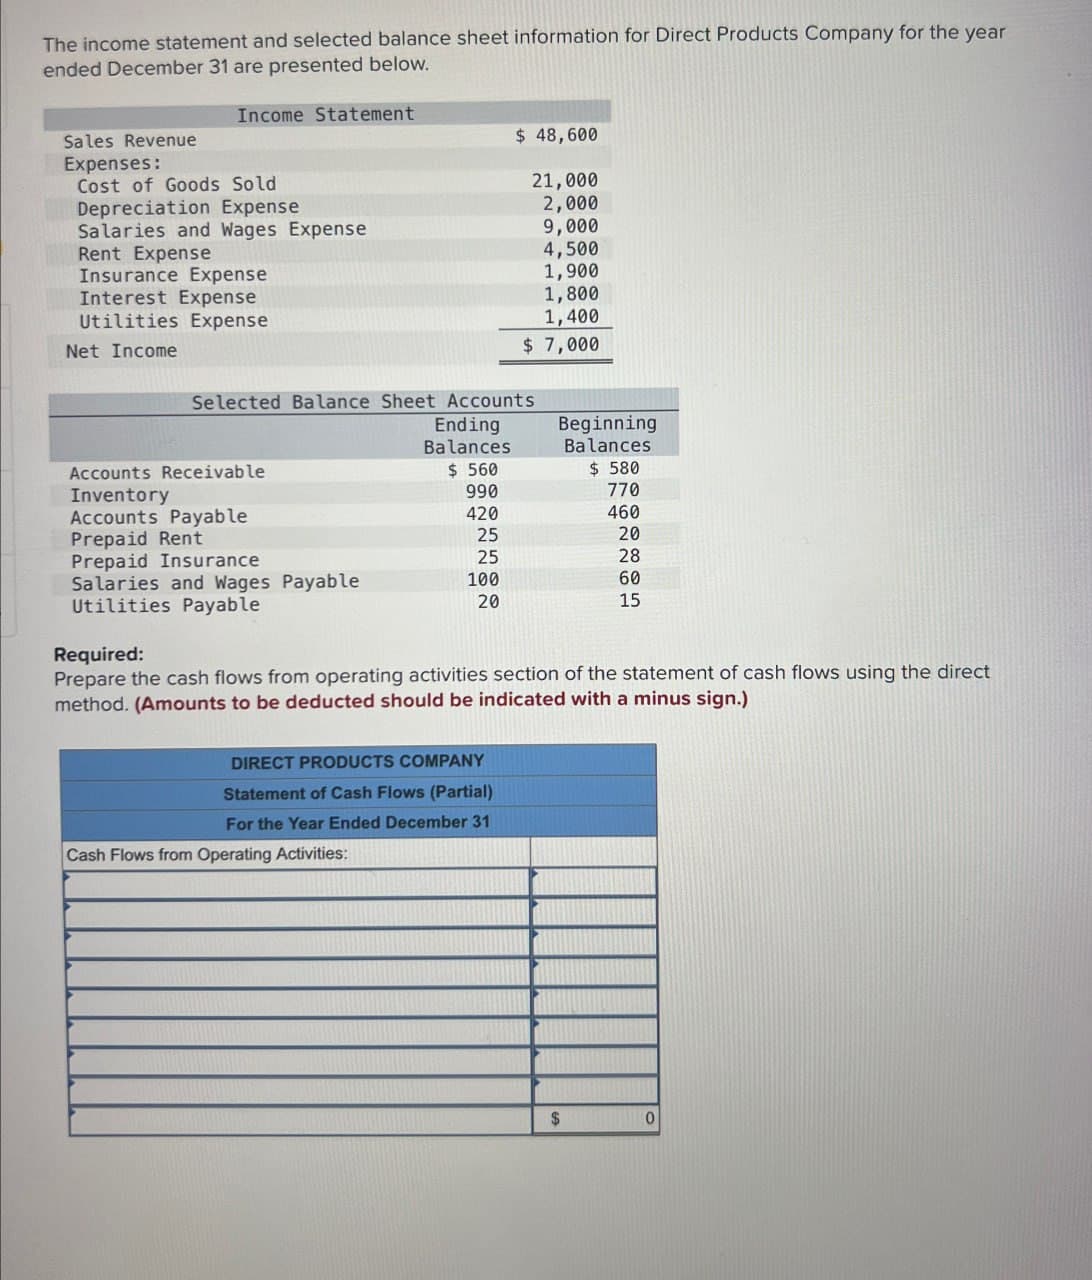 The income statement and selected balance sheet information for Direct Products Company for the year
ended December 31 are presented below.
Income Statement
Sales Revenue
$ 48,600
Expenses:
Cost of Goods Sold
21,000
Depreciation Expense
2,000
Salaries and Wages Expense
9,000
Rent Expense
4,500
Insurance Expense
1,900
Interest Expense
1,800
Utilities Expense
1,400
Net Income
$ 7,000
Selected Balance Sheet Accounts
Ending
Balances
Beginning
Balances
Accounts Receivable
$ 560
$ 580
Inventory
990
770
Accounts Payable
420
460
Prepaid Rent
25
20
Prepaid Insurance
25
28
Salaries and Wages Payable
100
60
Utilities Payable
20
15
Required:
Prepare the cash flows from operating activities section of the statement of cash flows using the direct
method. (Amounts to be deducted should be indicated with a minus sign.)
DIRECT PRODUCTS COMPANY
Statement of Cash Flows (Partial)
For the Year Ended December 31
Cash Flows from Operating Activities:
$
0